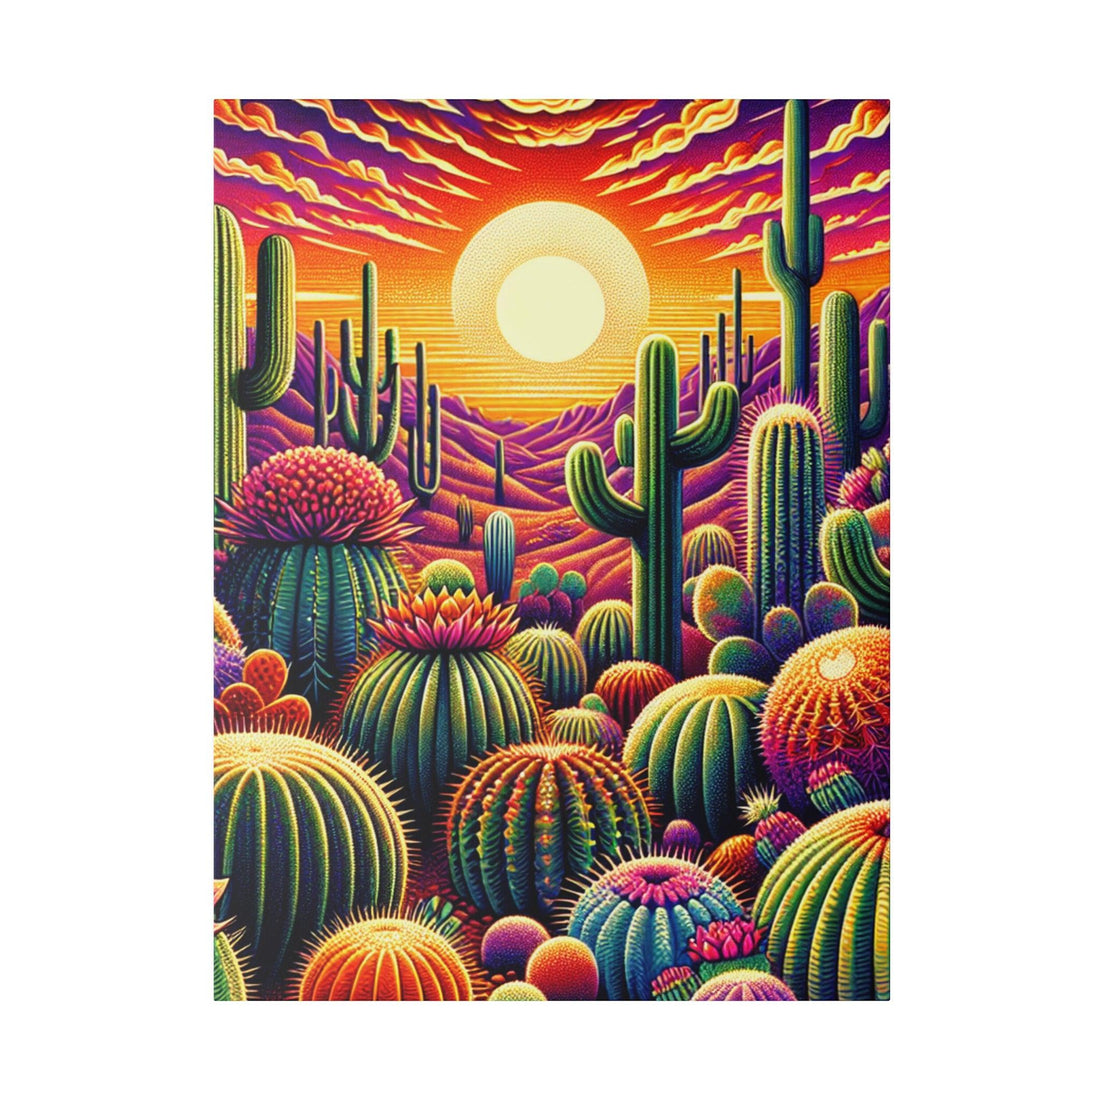 "Cactus Dreamscape: Captivating Canvas Wall Art" - The Alice Gallery